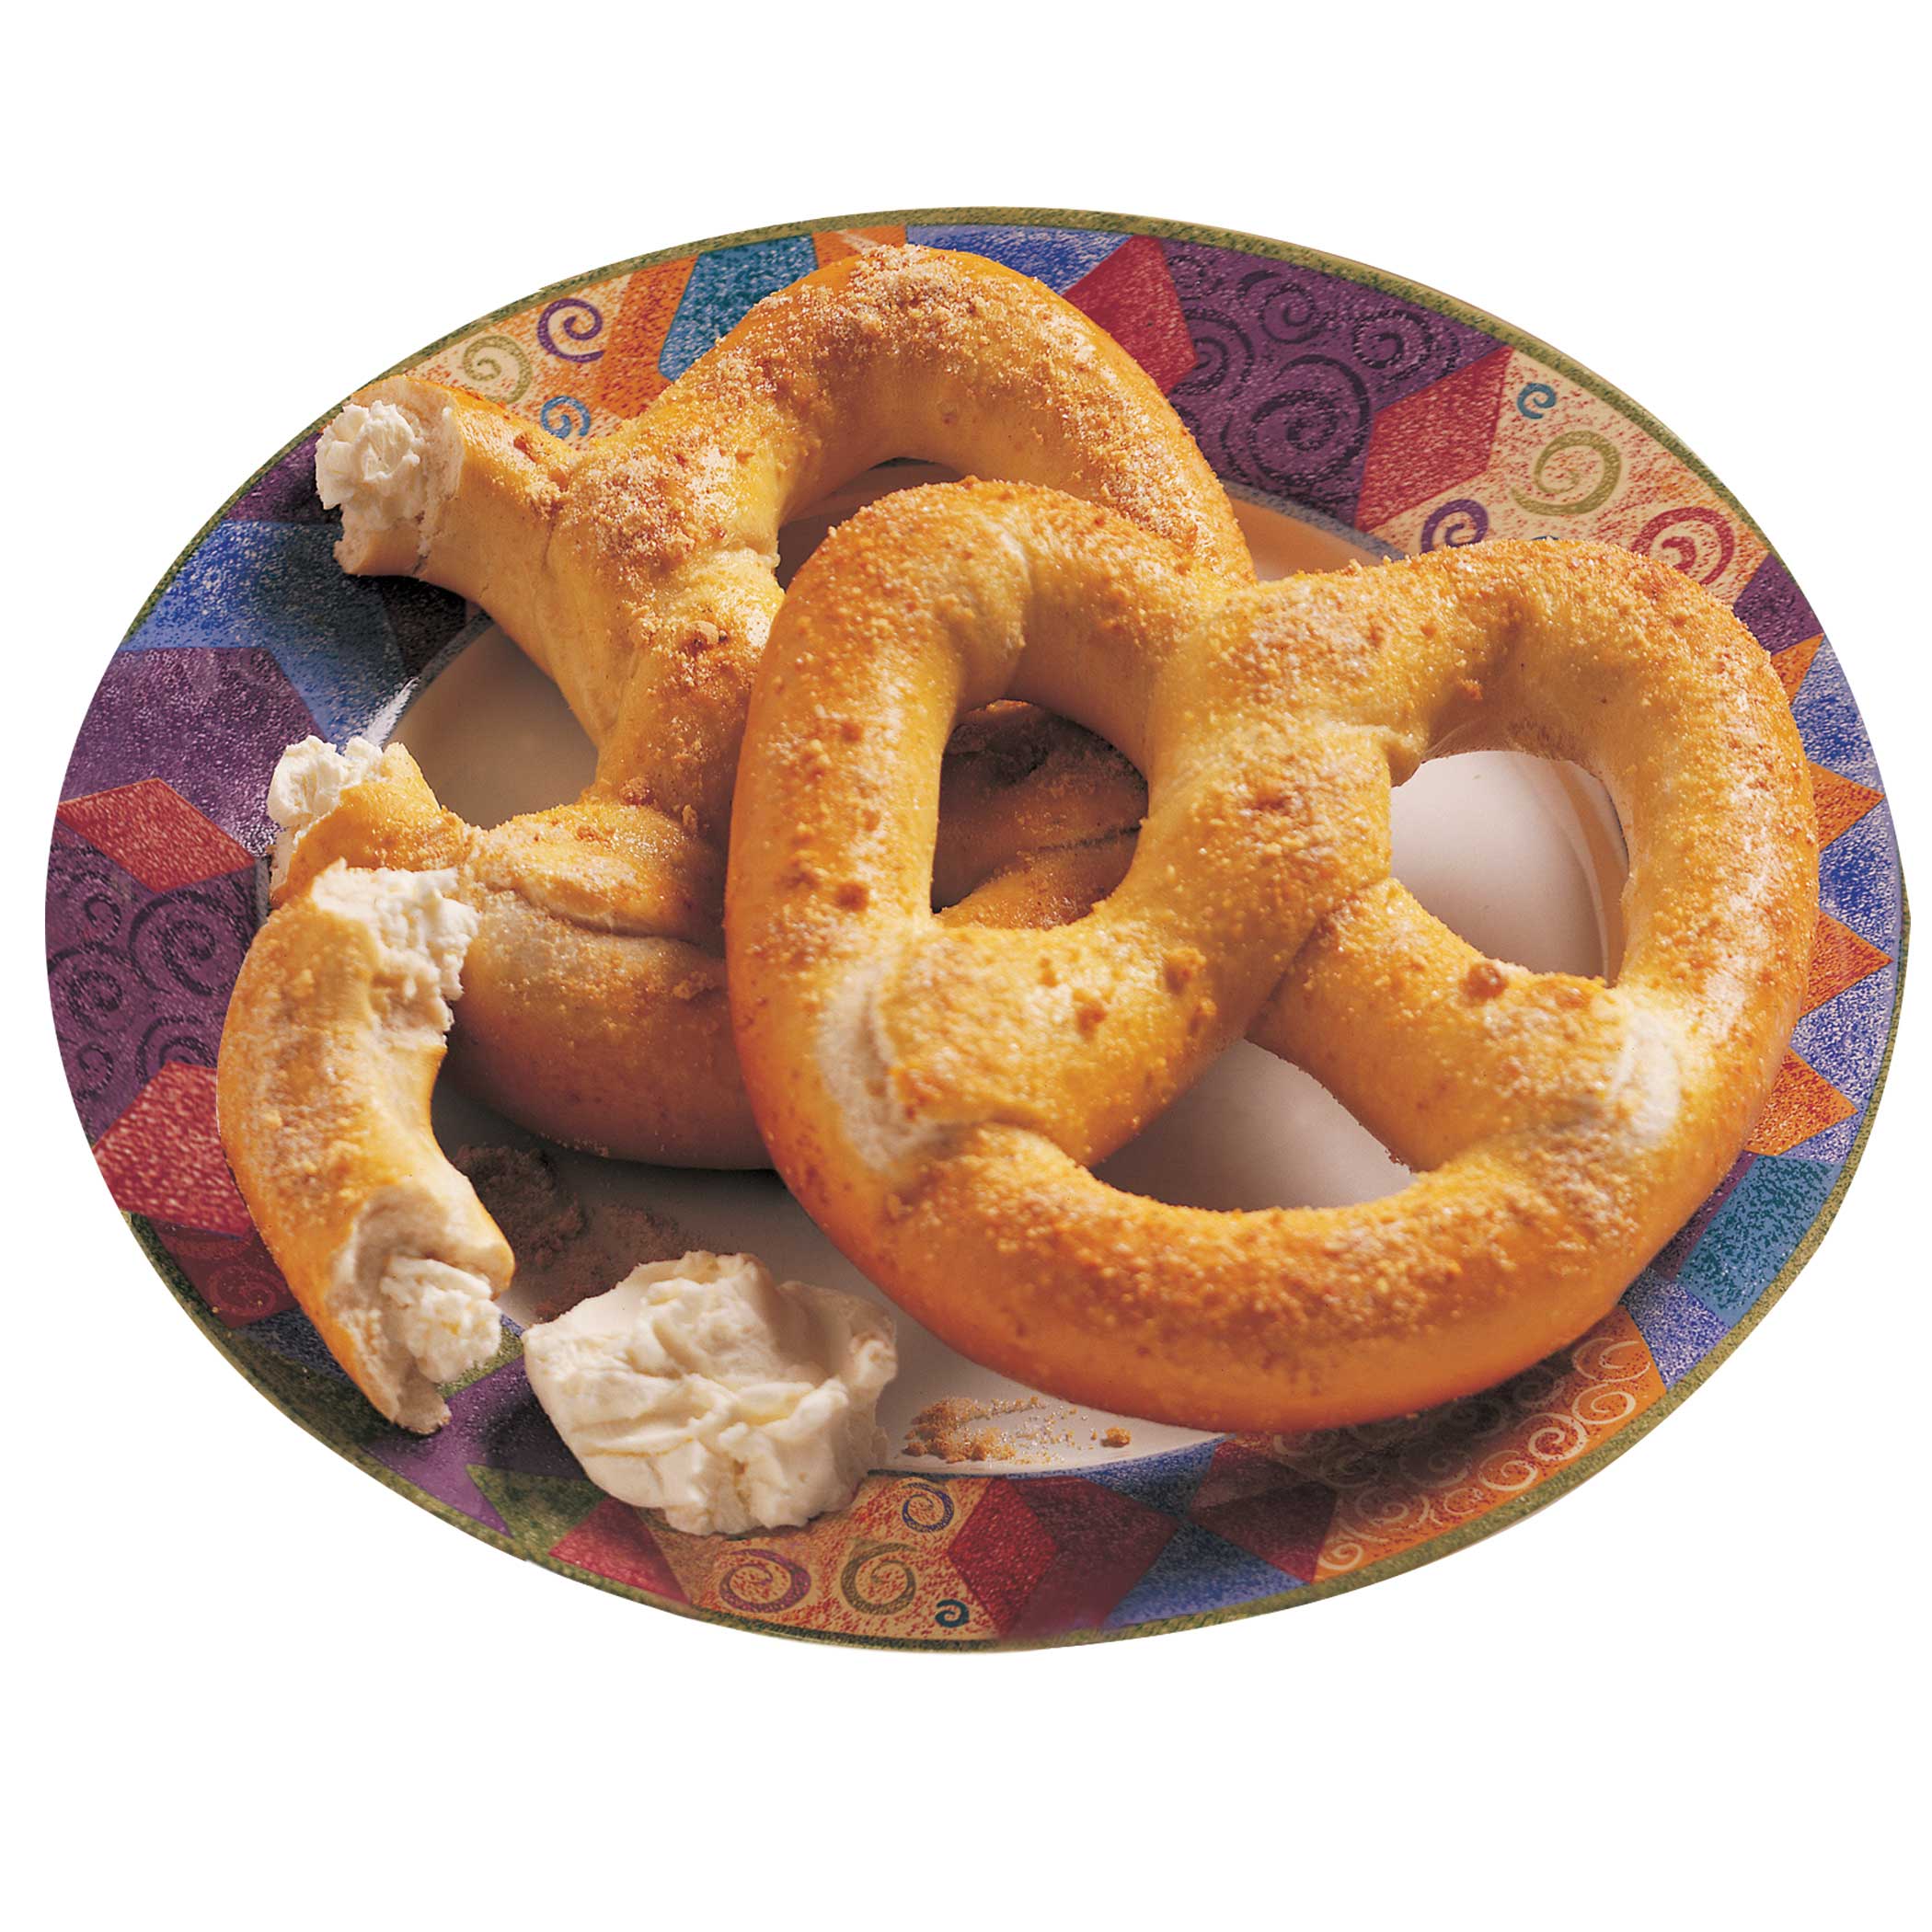 J and J Snack Sweet Dream Cream Cheese Pretzel Fillers, 3.5 Ounce -- 48 per case.